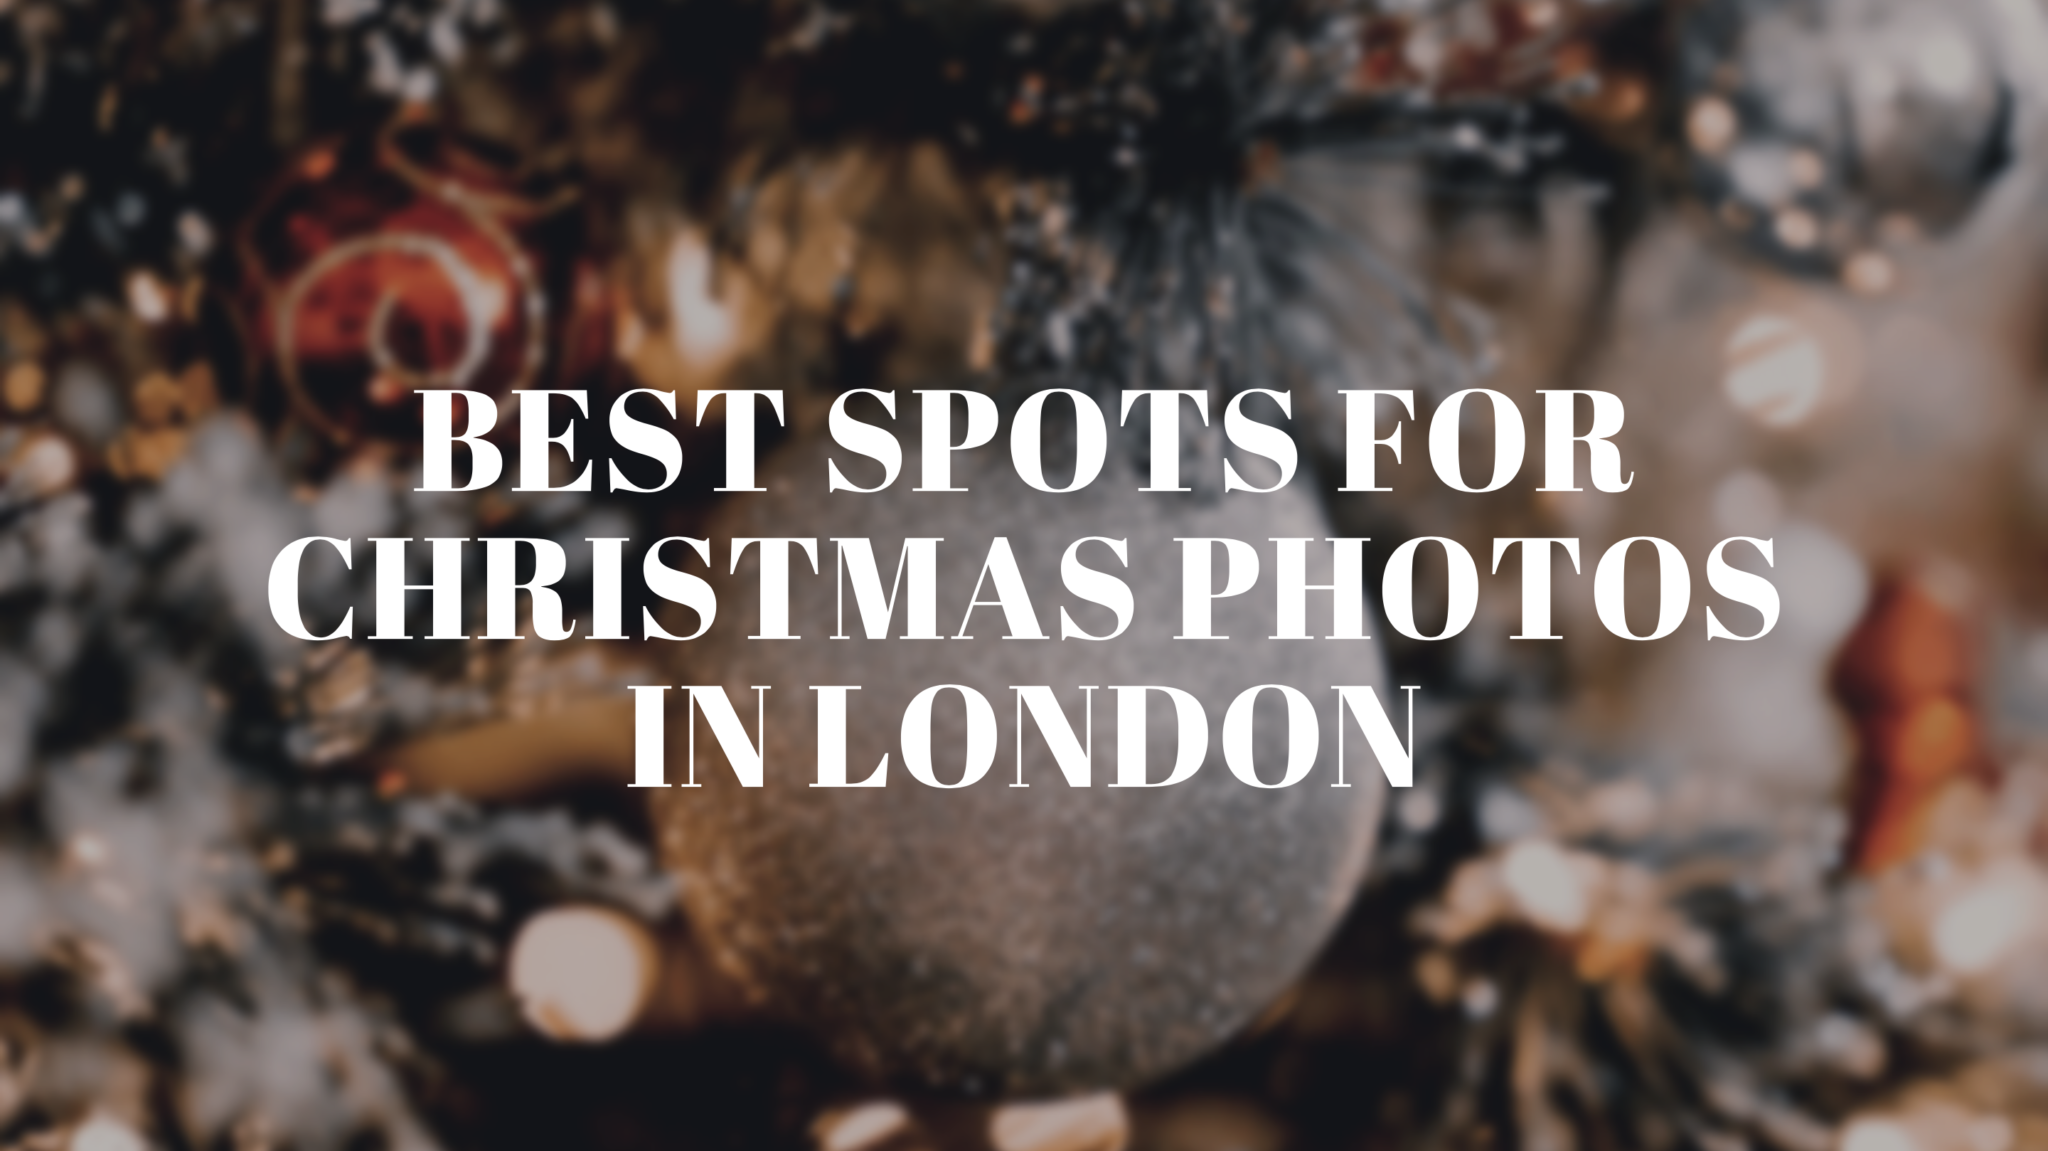 Want to Take the Best Picture for your Christmas Card or Instagram? Check out our Top 5 Picks for The Best Spots for Christmas Photos in London. Urban Stay